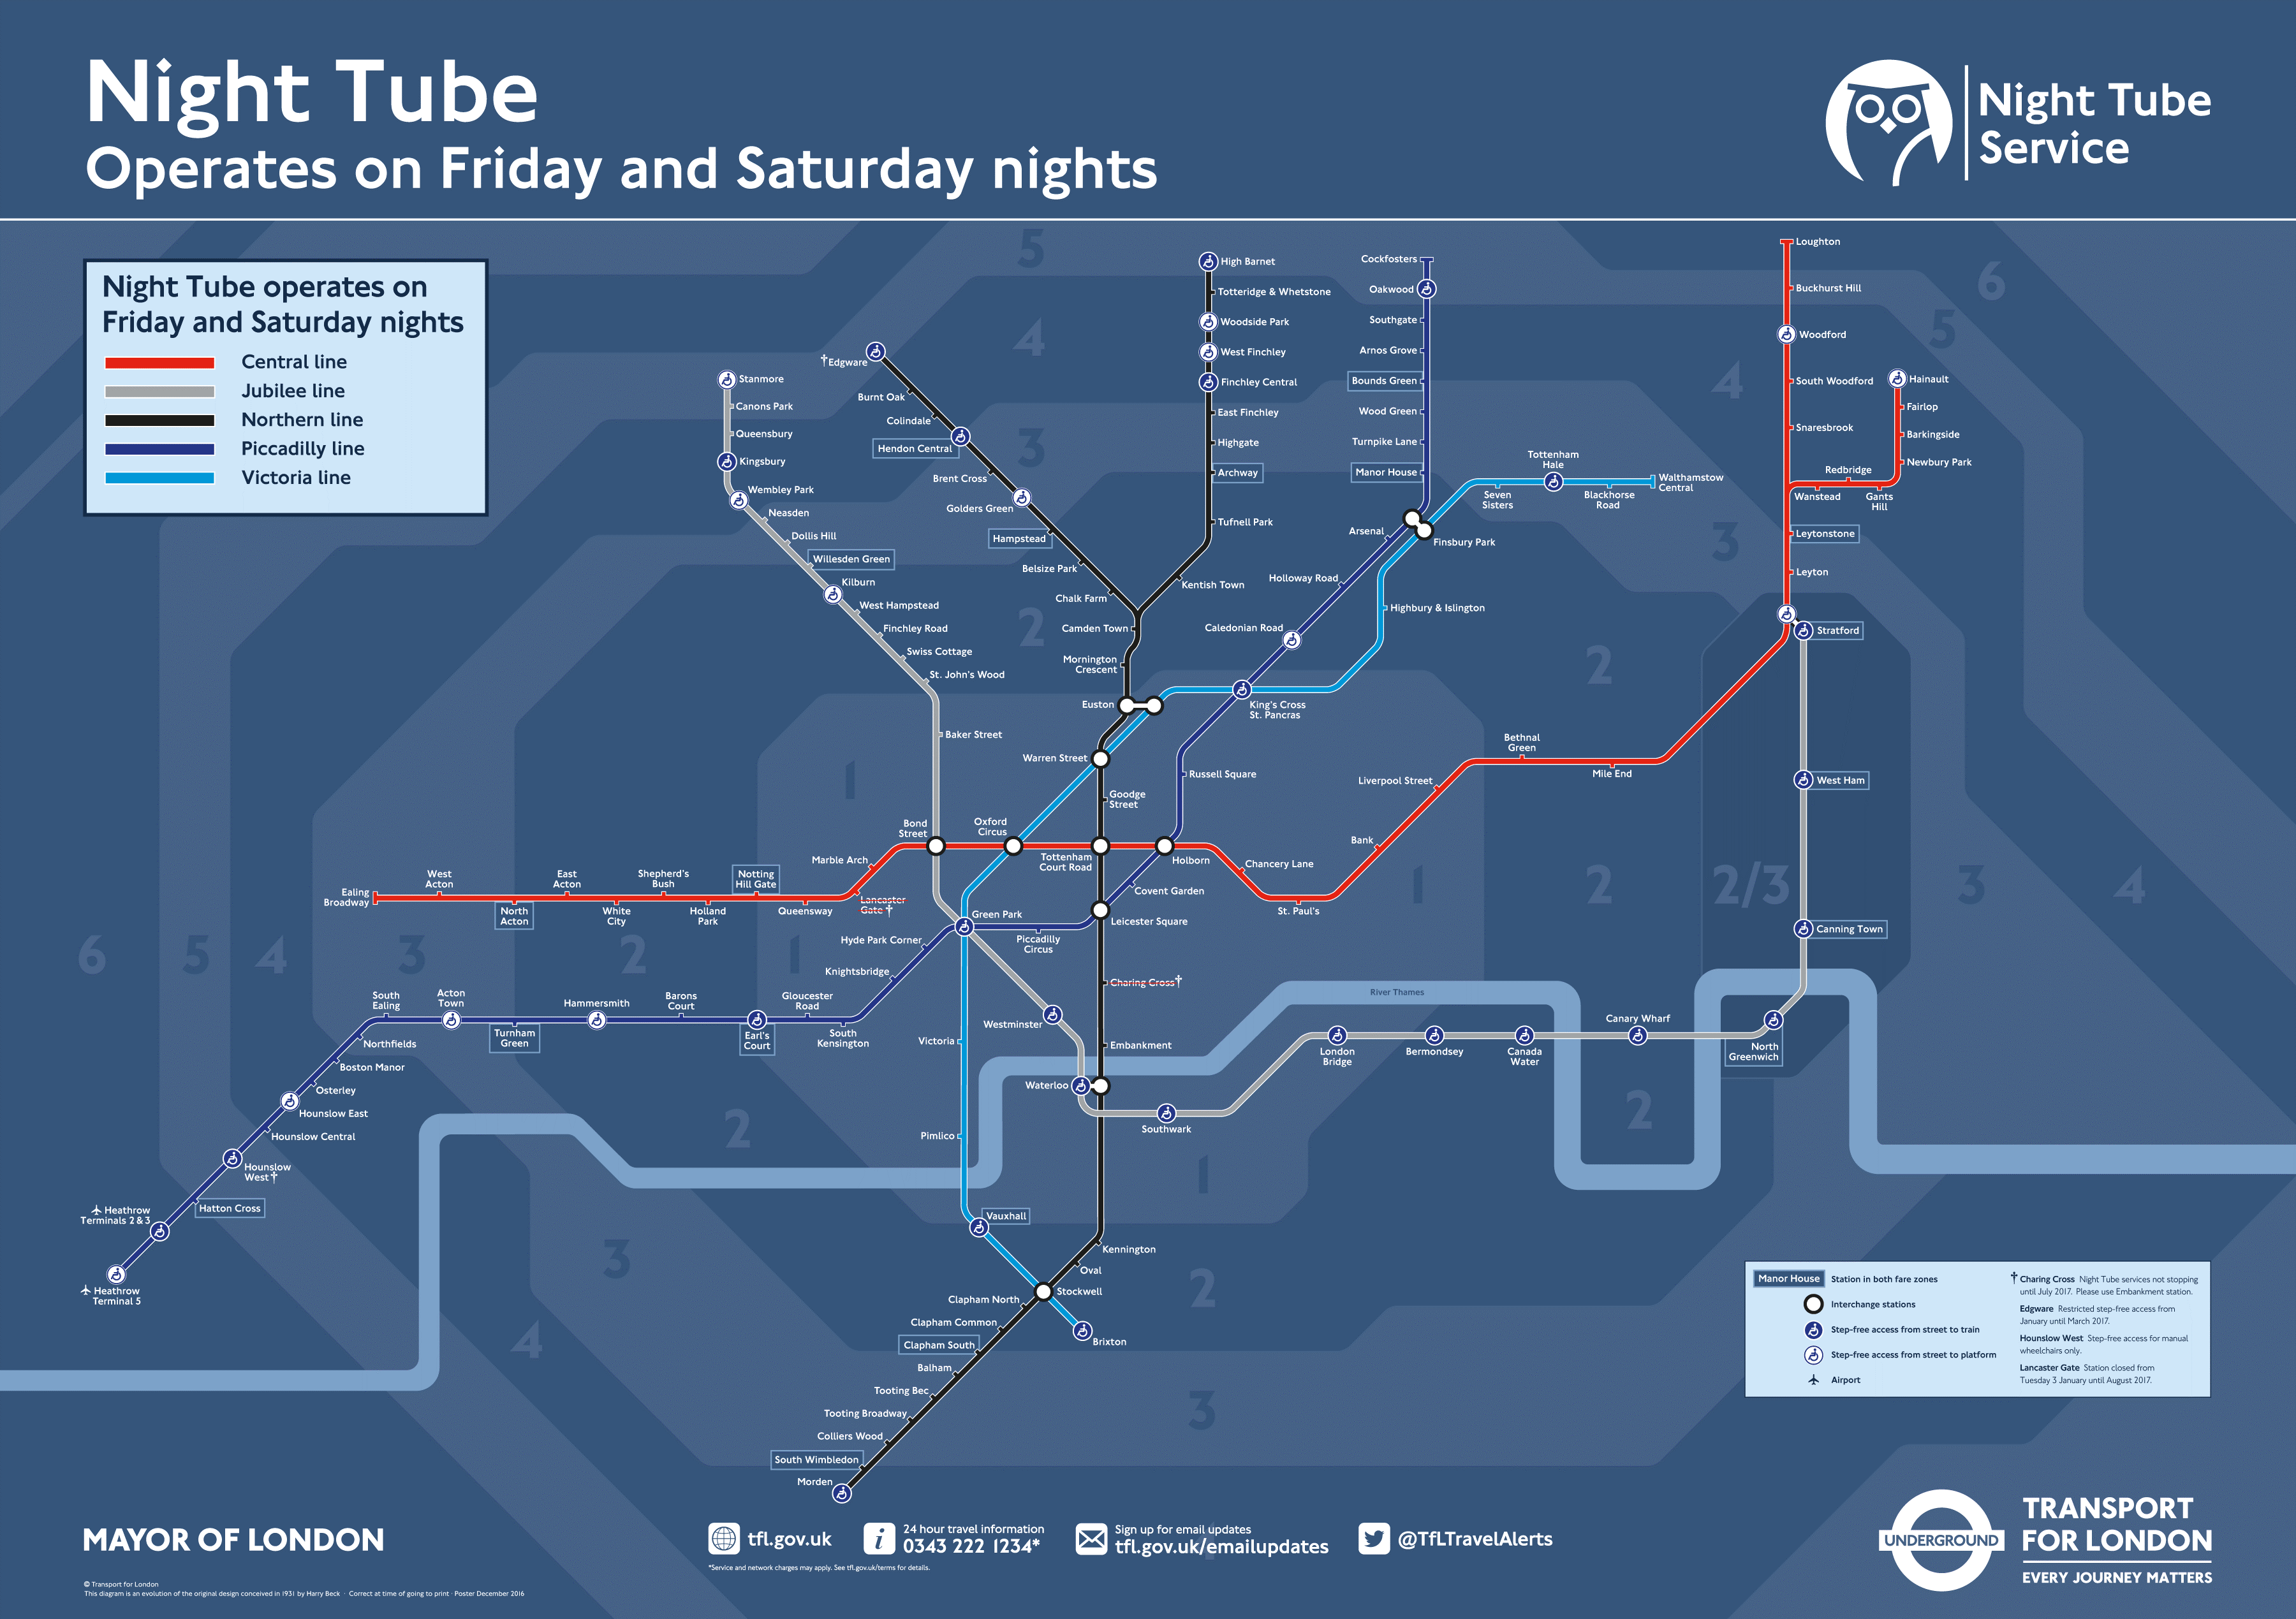 The Night Tube is running Fridays and Saturdays on the Victoria, Jubilee, and most of the Central, Northern and Piccadilly lines